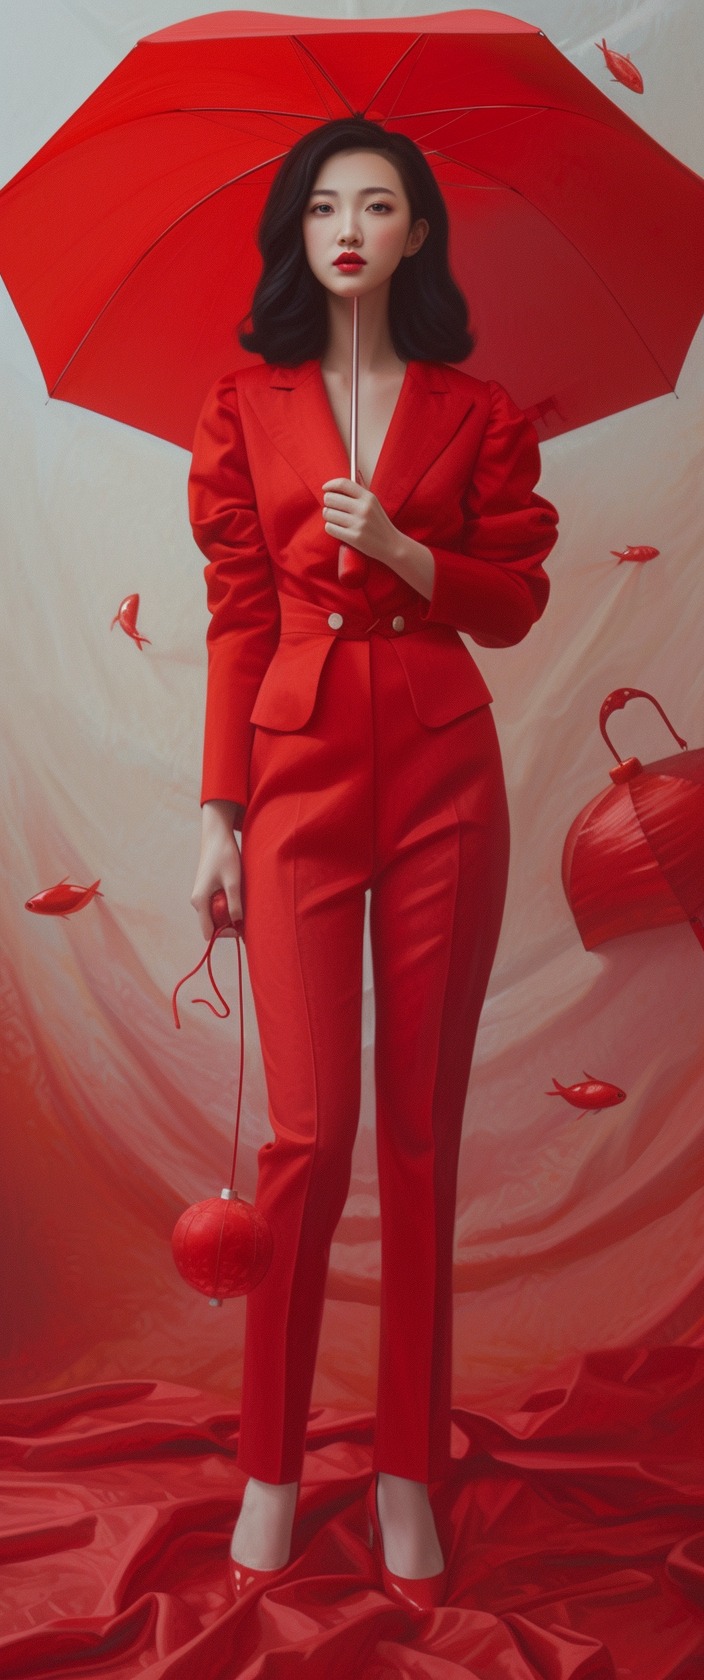 hxnpjfhjmw98_65407_woman_in_red_suit_with_red_umbrella_in_the_s_17f2ff35-d3d0-42e7-8f5c-6fd3f9aac7f0